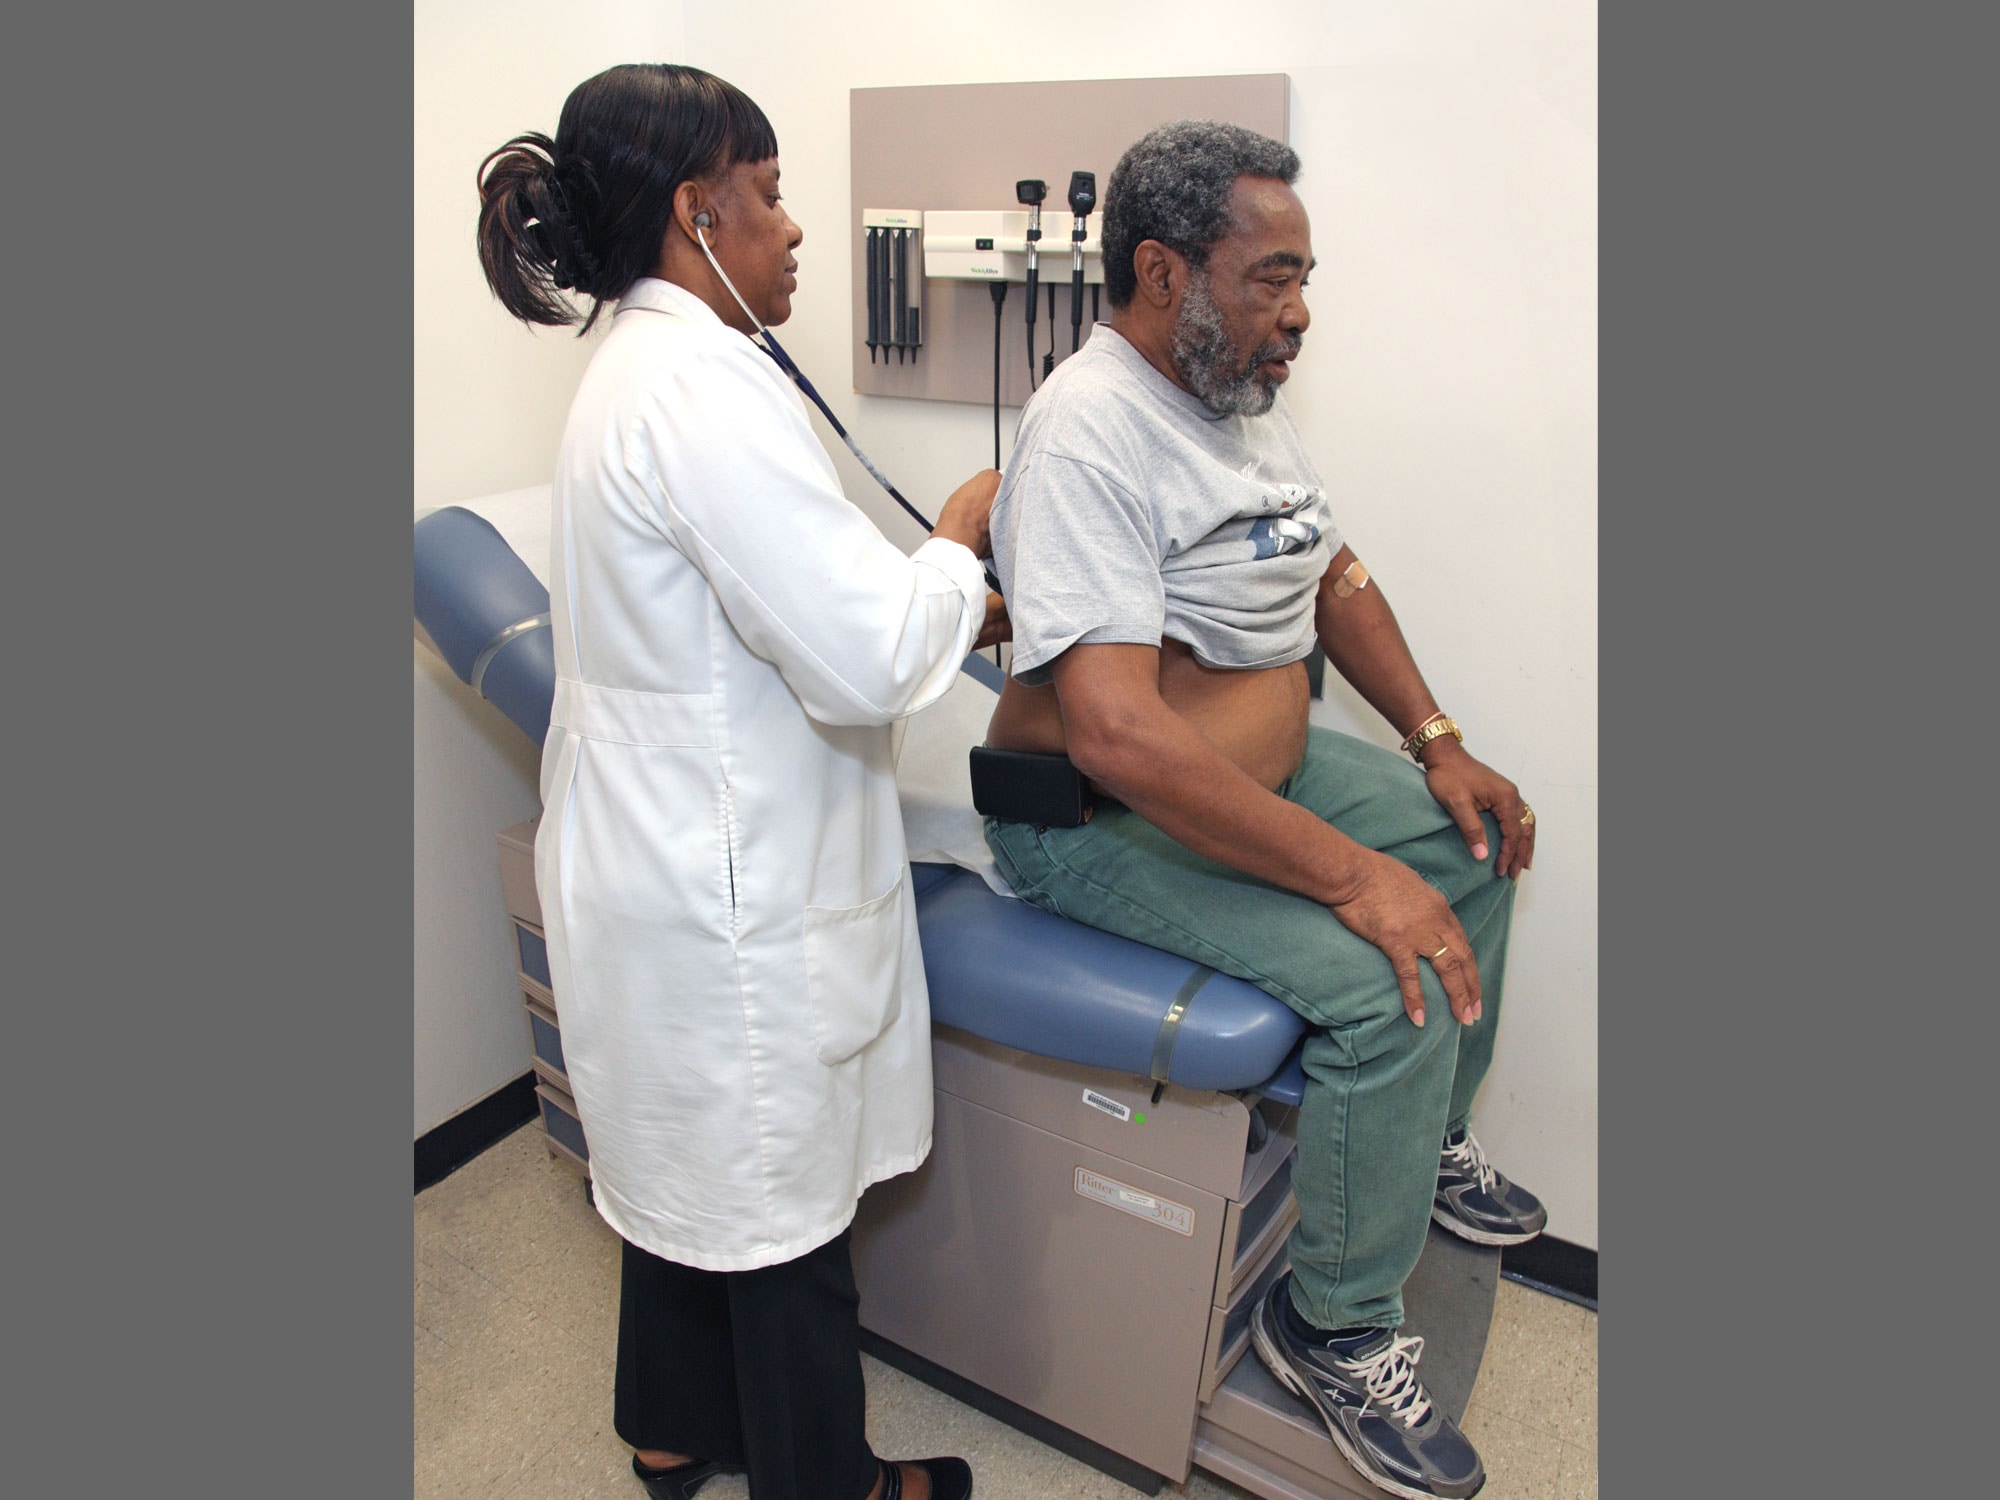 A health care provider examining a patient